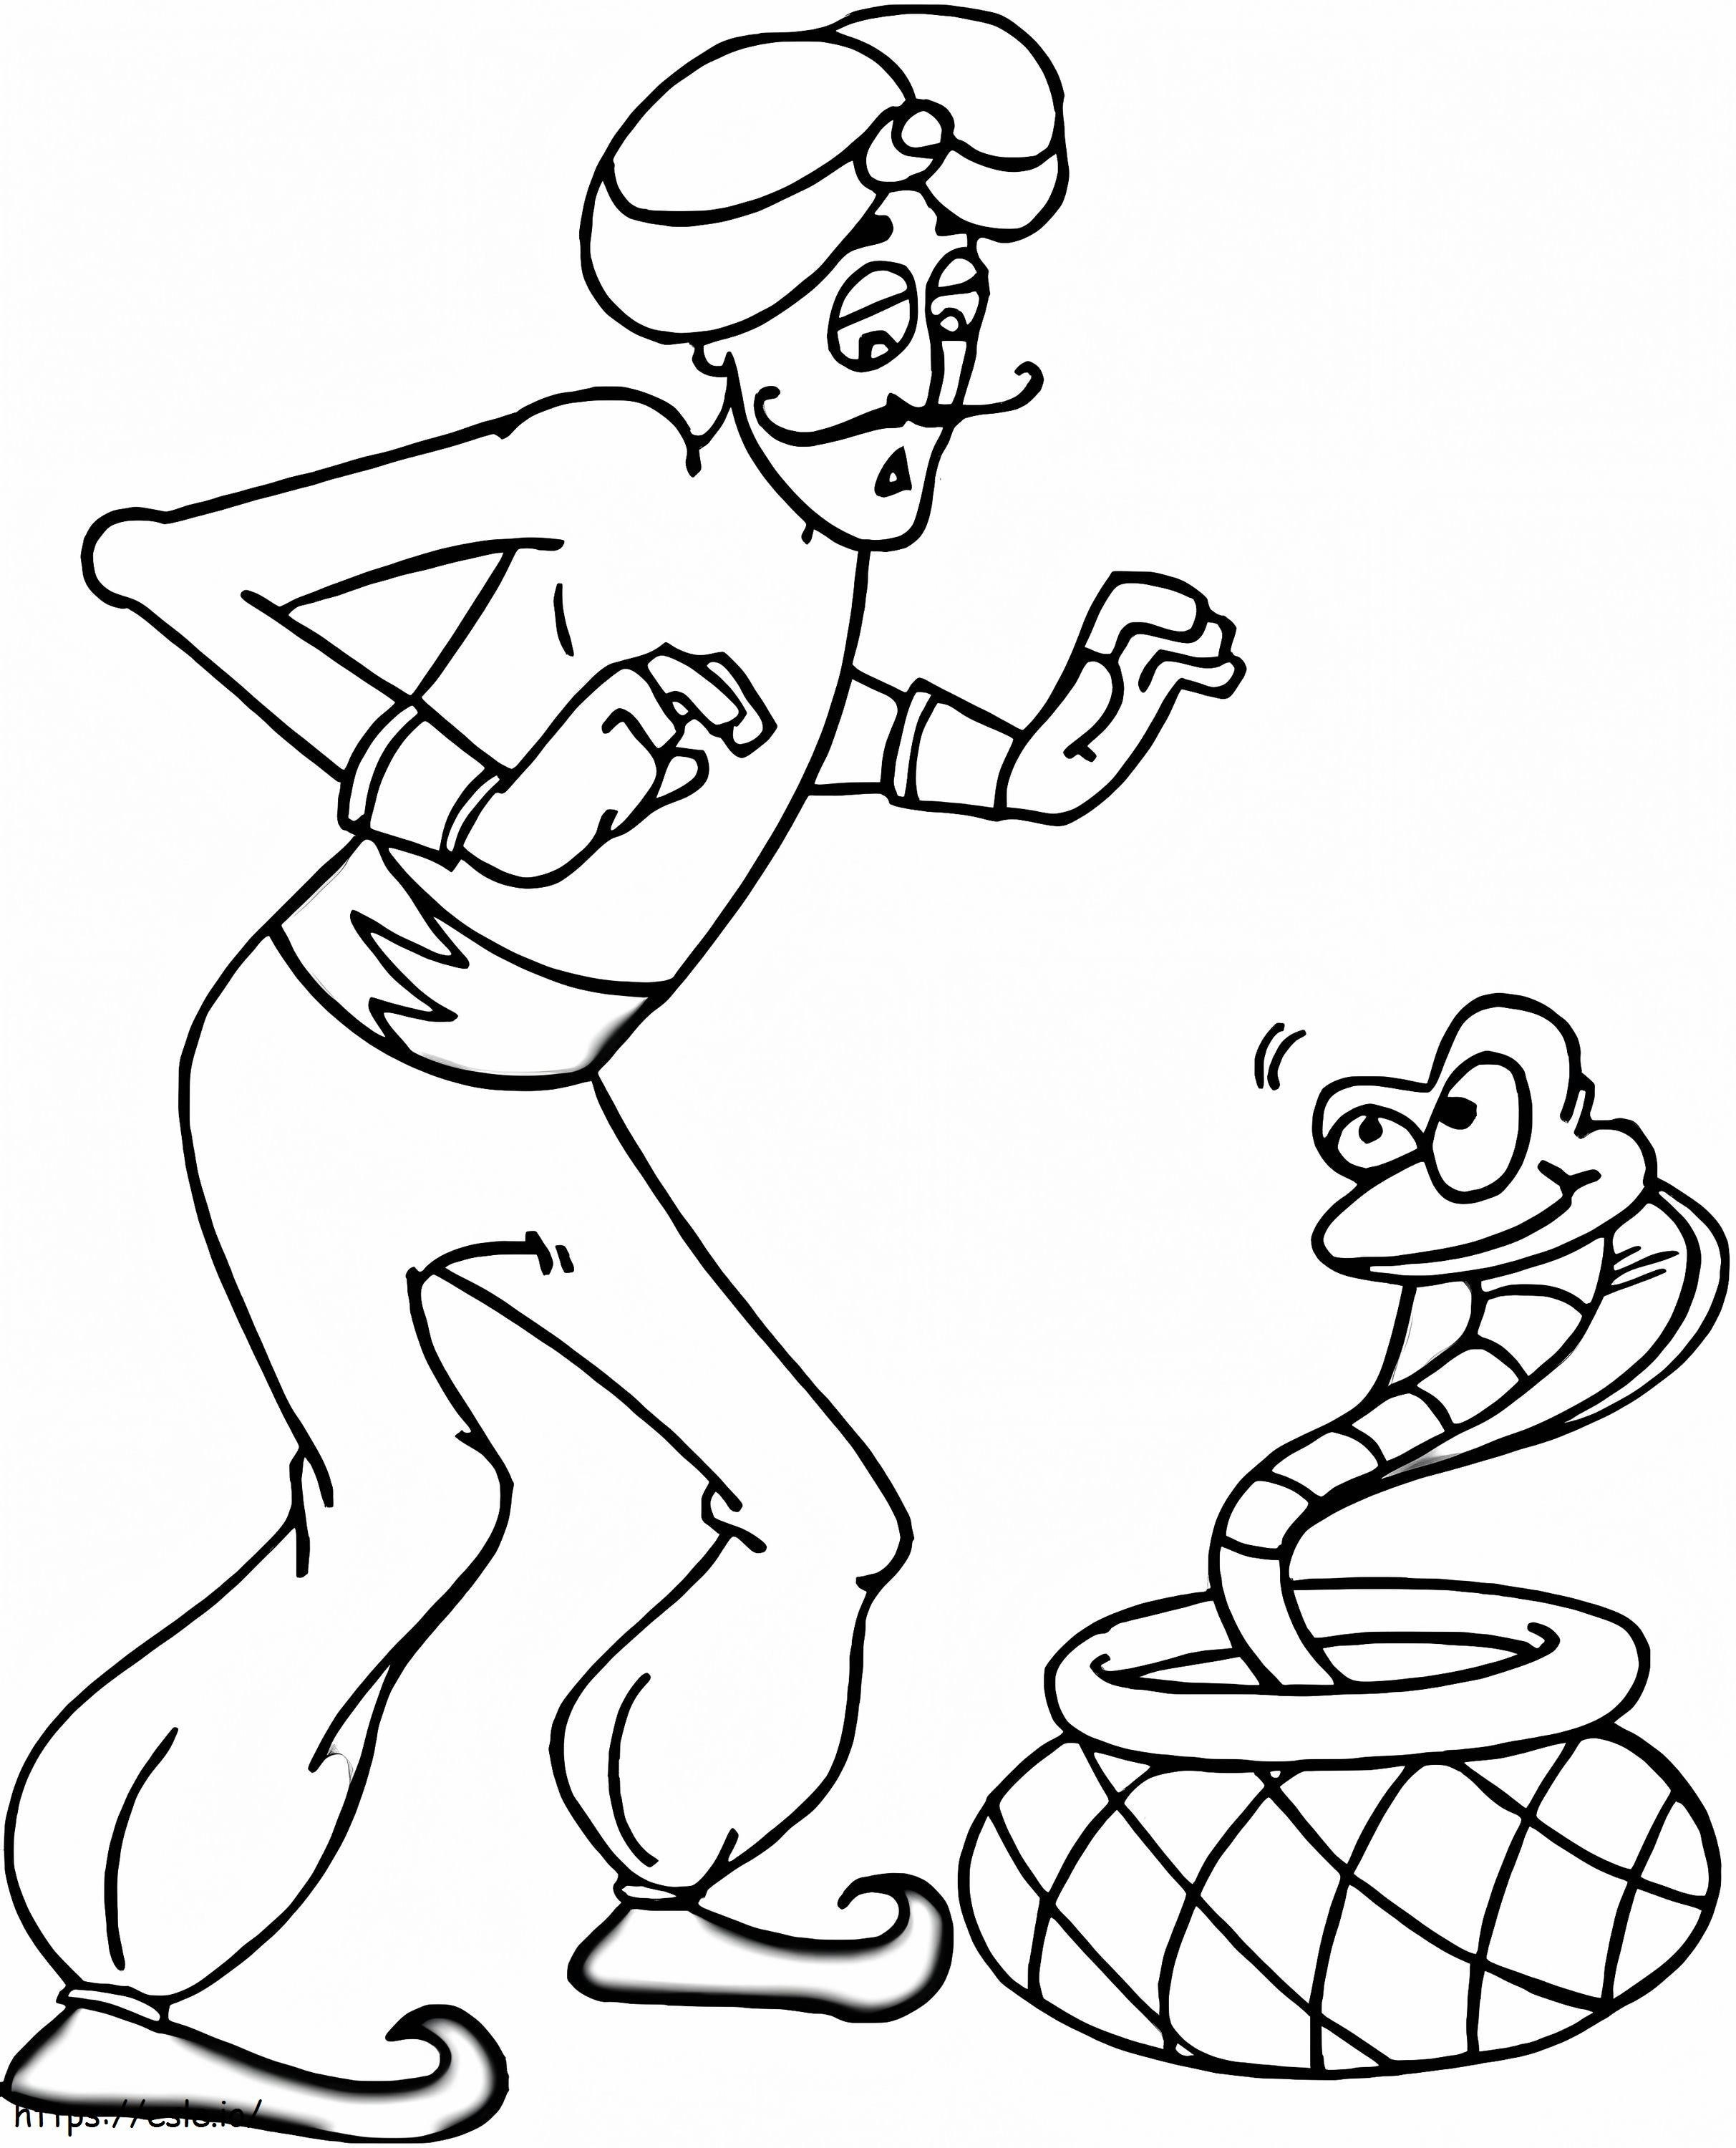 Indian Man And Cobra coloring page